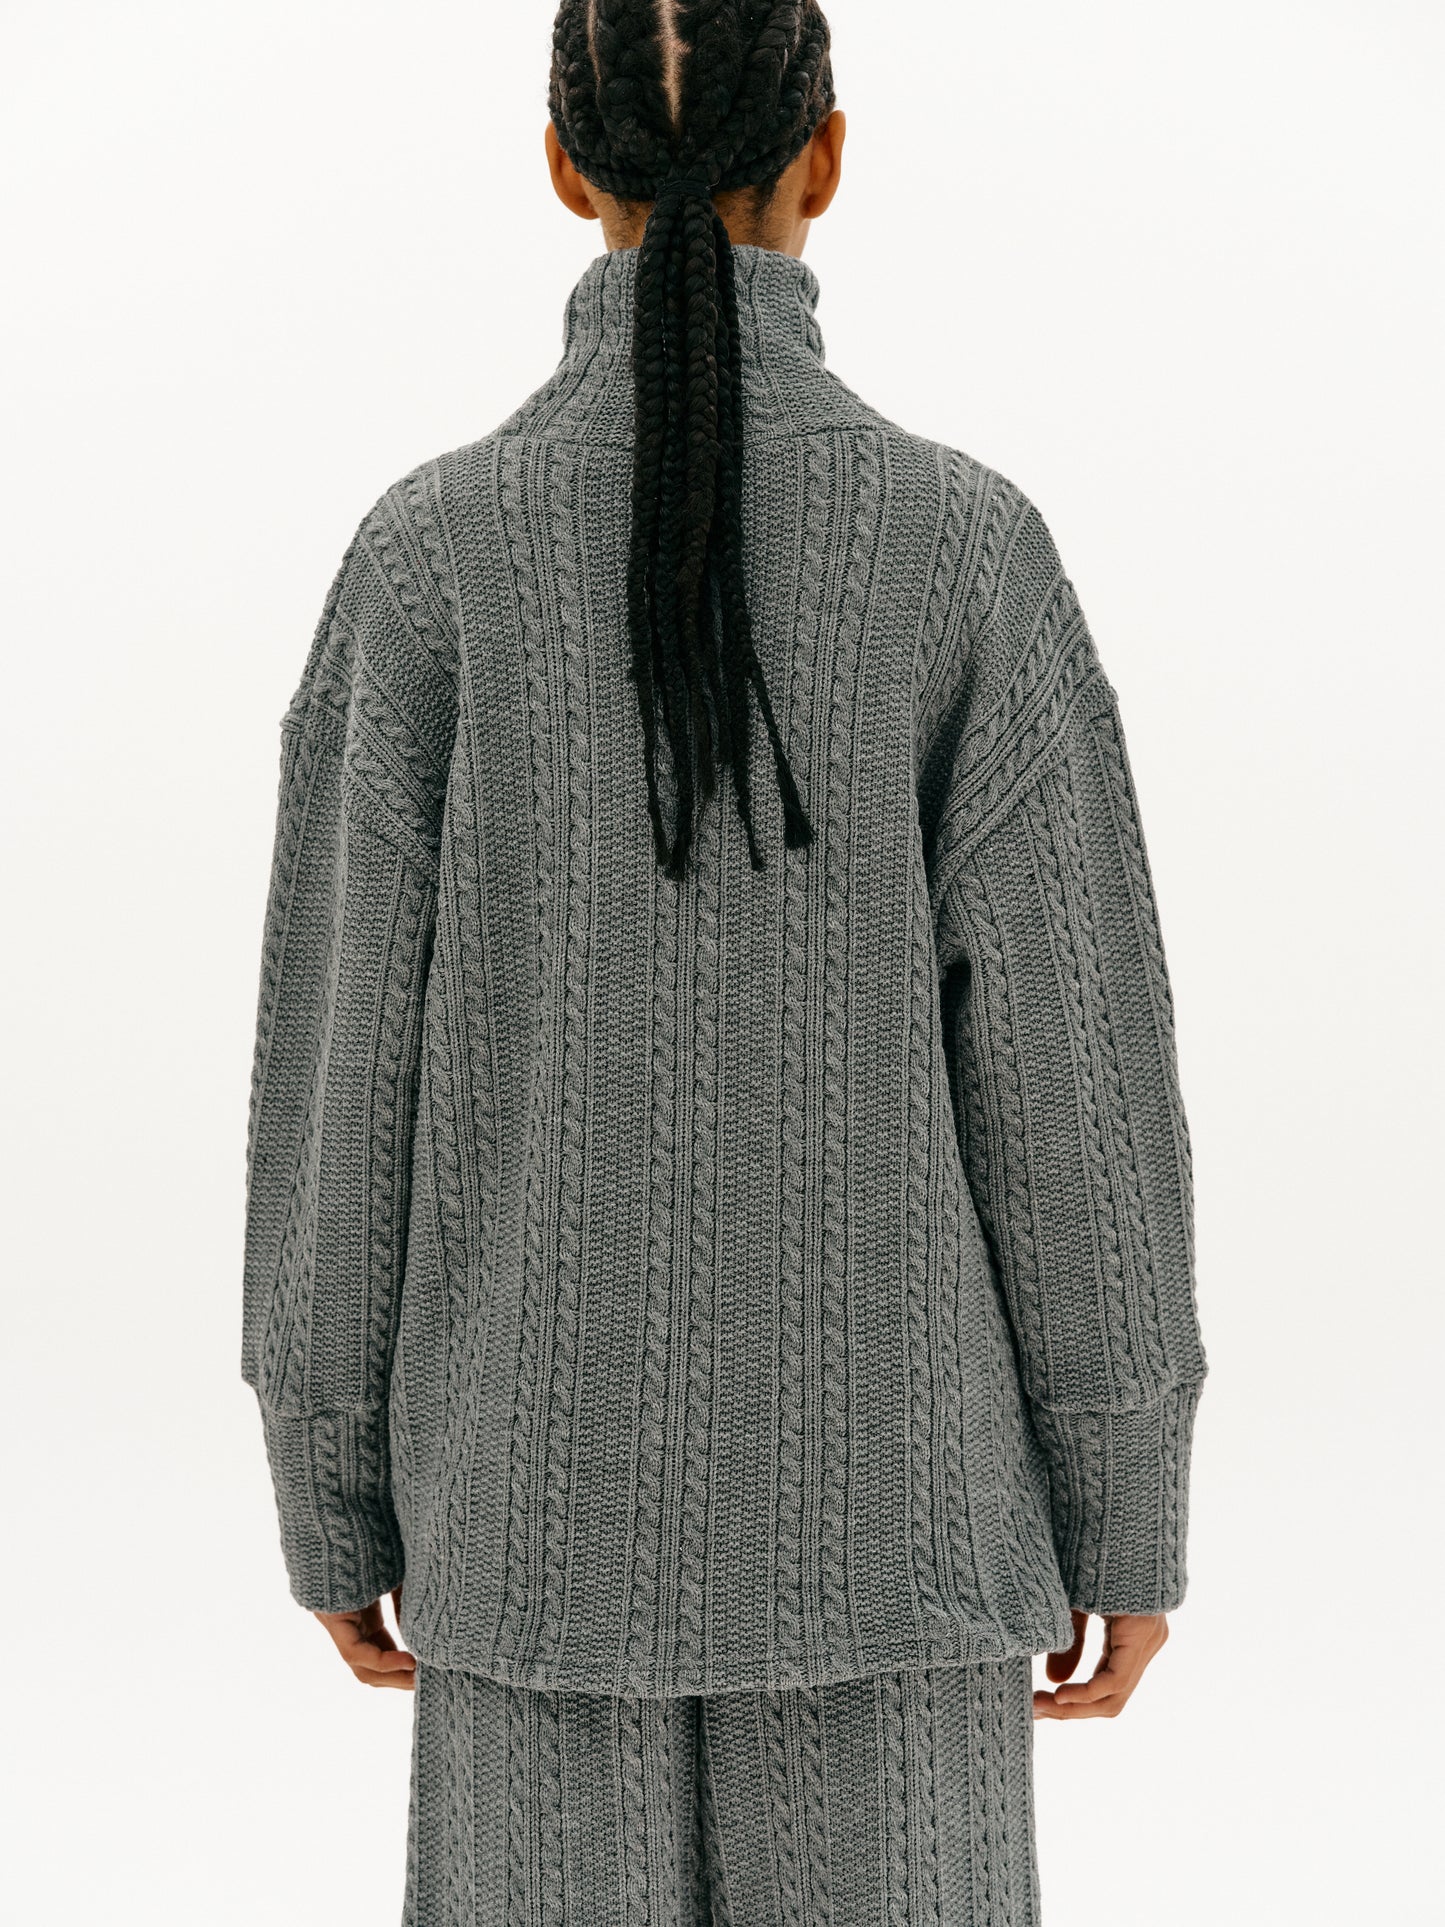 Cape Turtleneck Pullover, Charcoal Grey